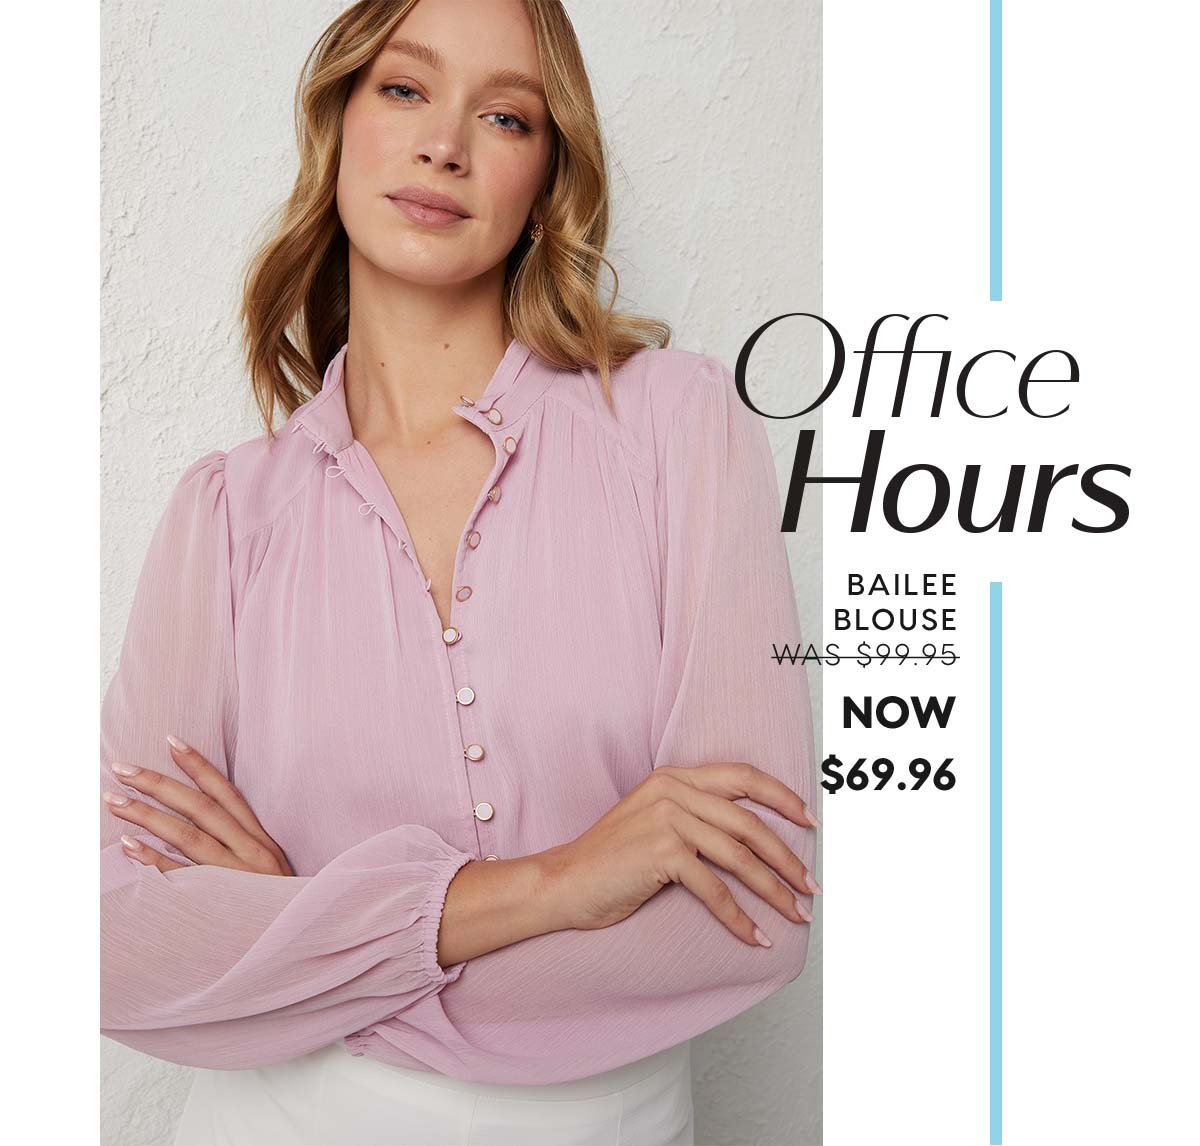 Office Hours. Bailee Blouse  WAS $99.95 NOW  $69.96